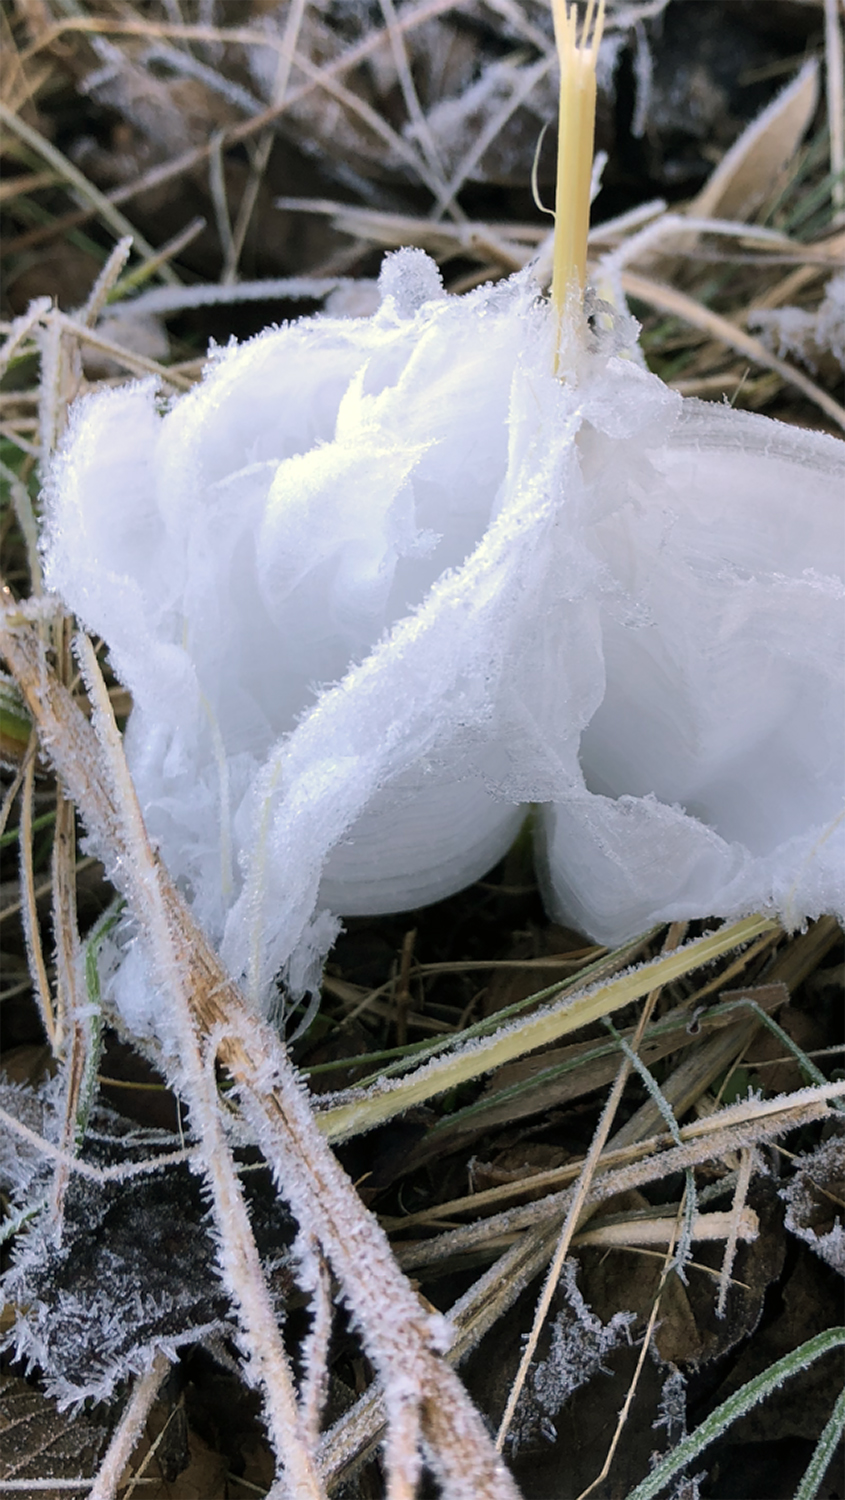 Frost flowers in Tennessee. Photograph shot on November 3, 2019. Copyright Keith Dotson.